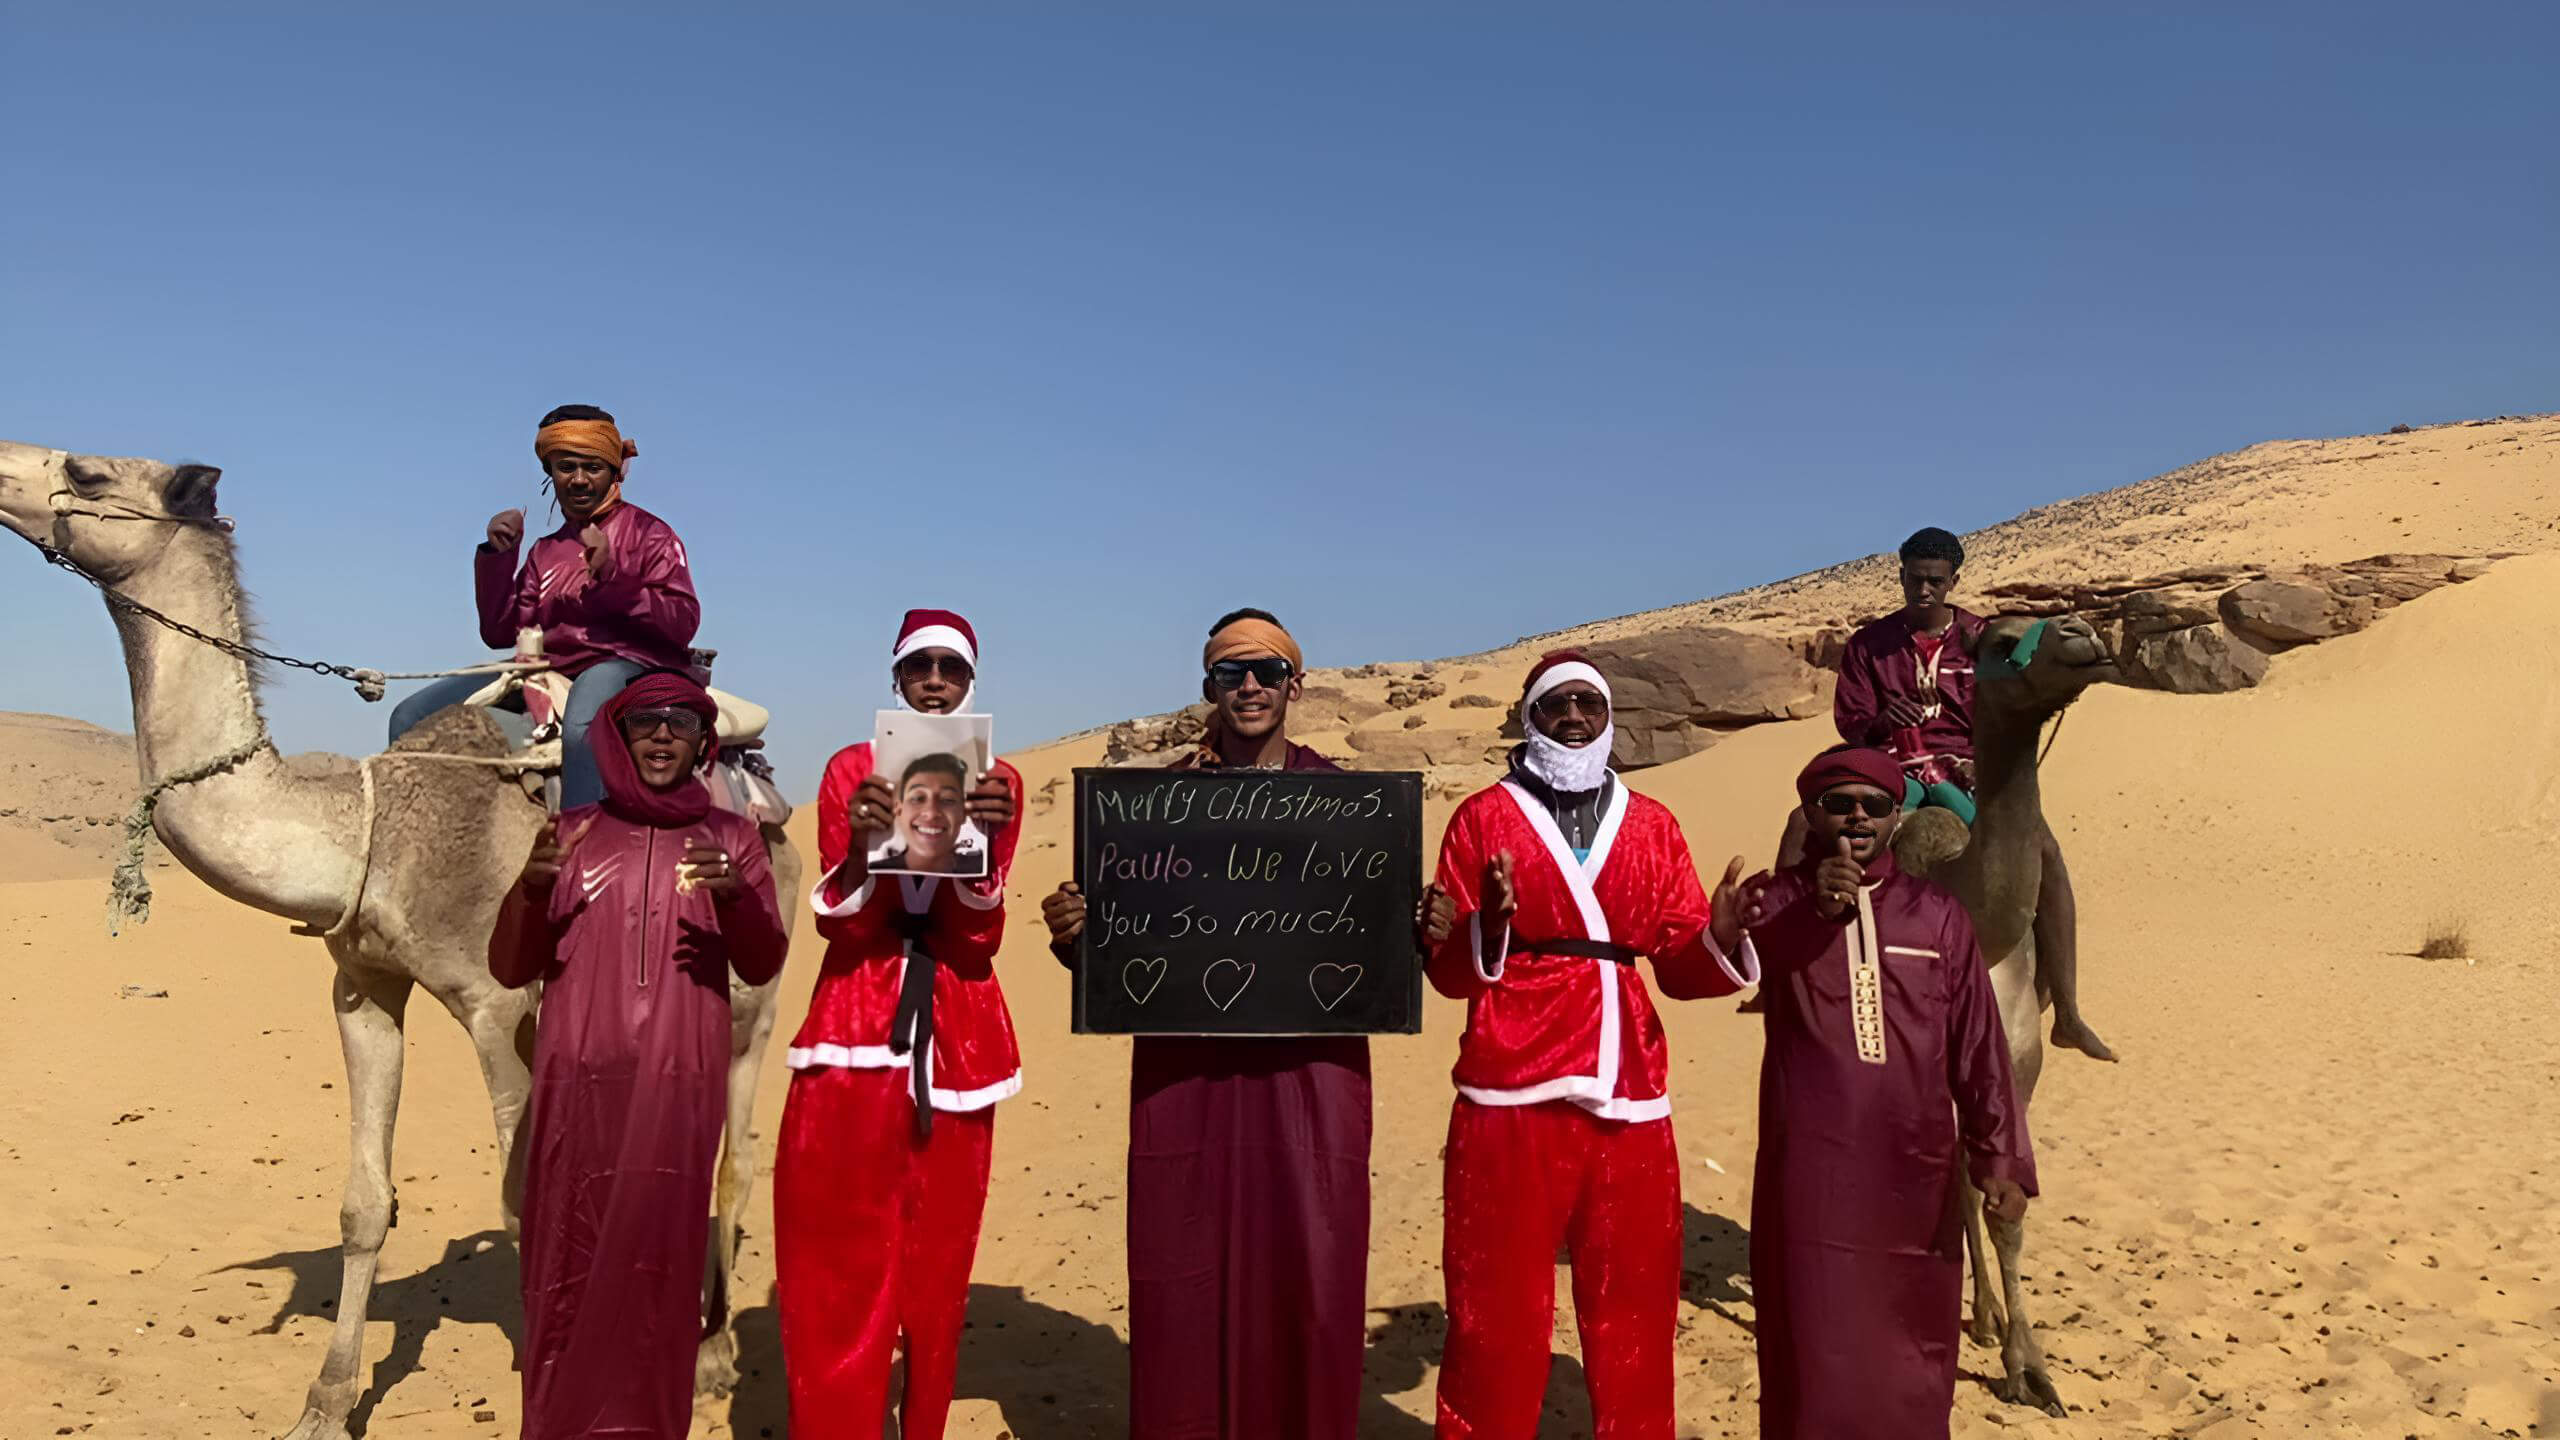 Christmas greetings from Africa